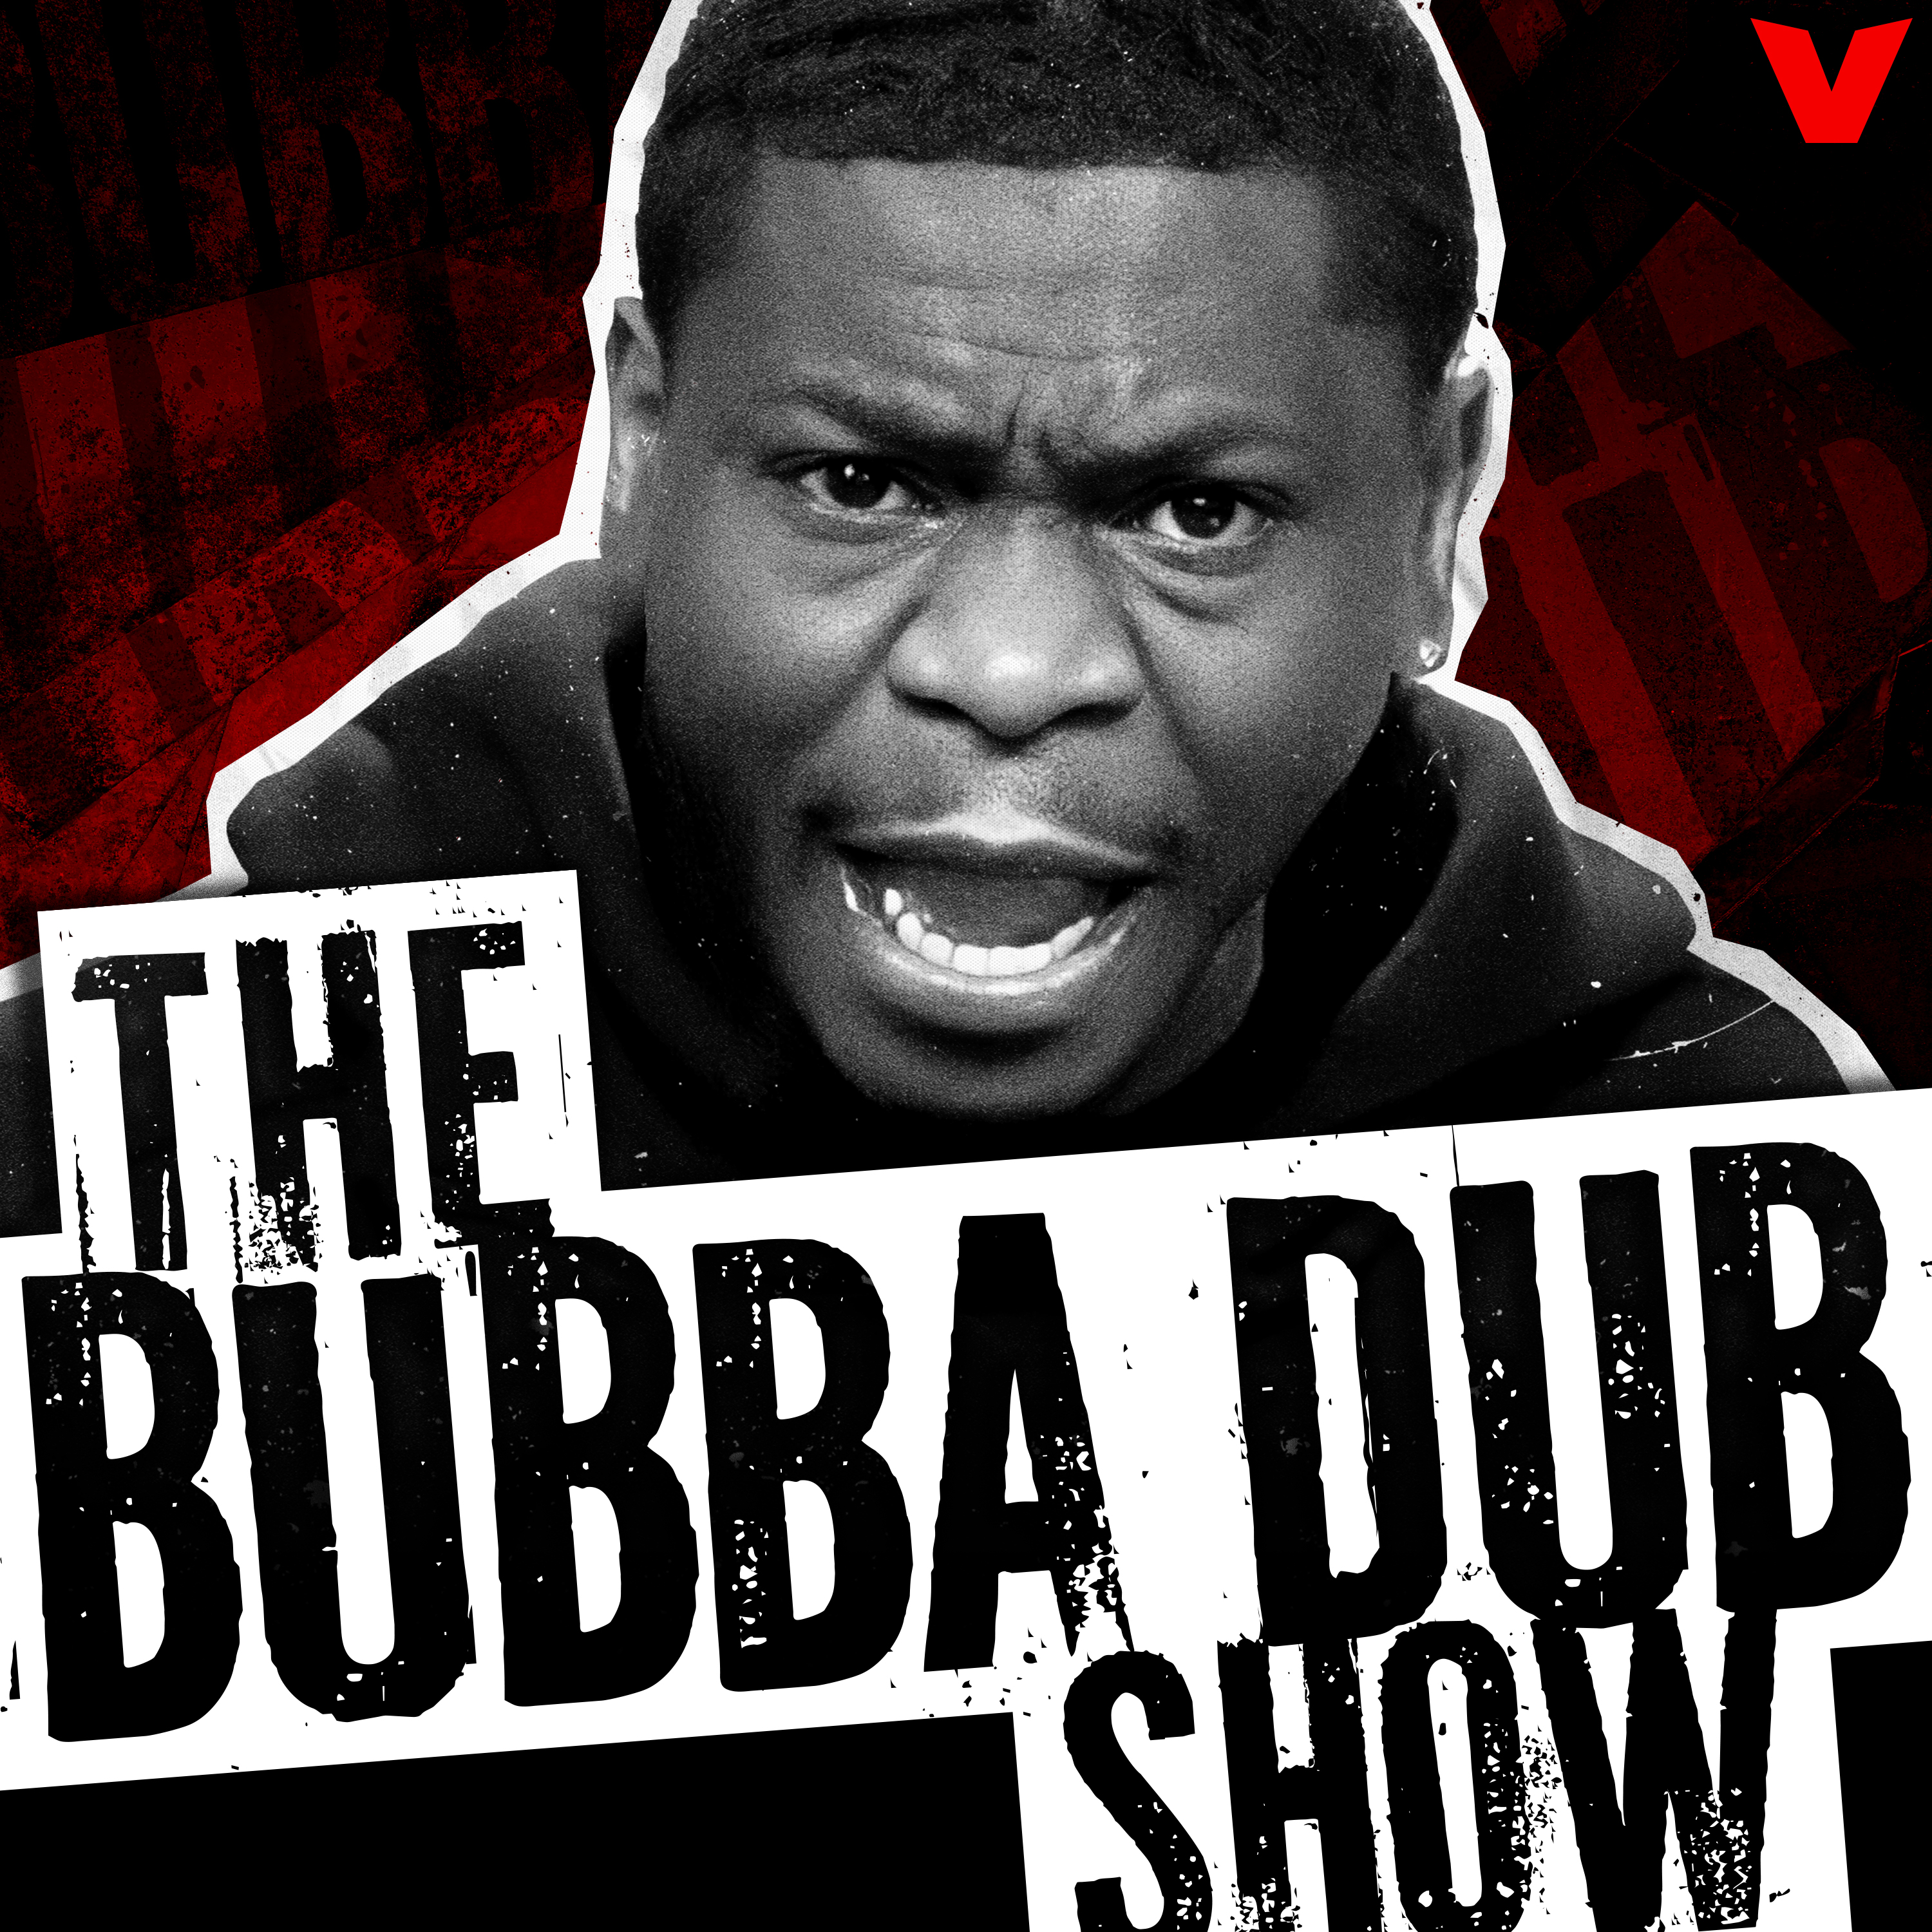 The Bubba Dub Show - How The Lakers Win It All, Fixing Tiger’s Game, Allen Iverson Statue, Trash of the Week